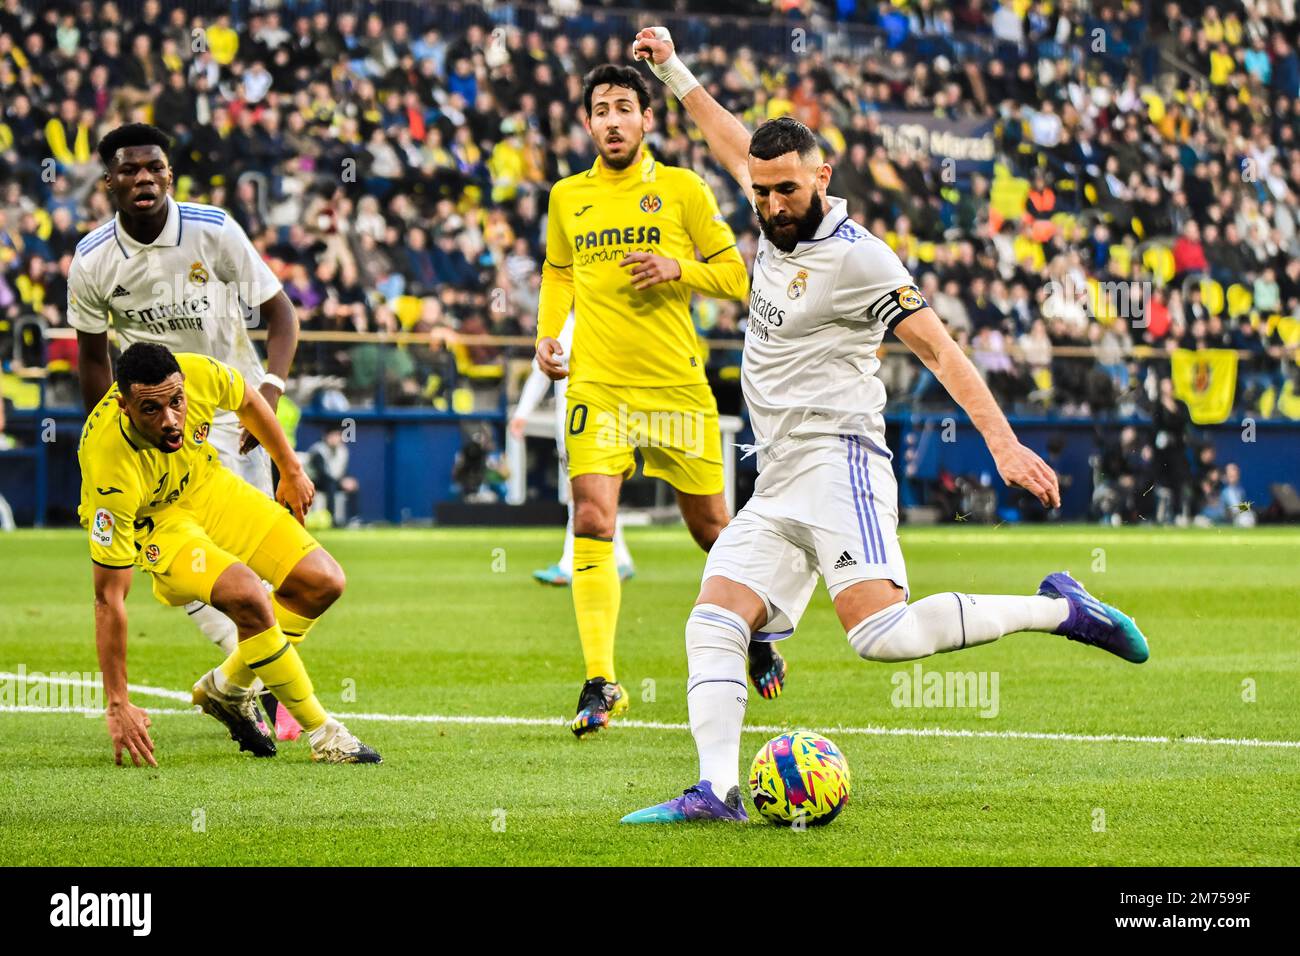 VILLARREAL, SPAIN - JANUARY 7: Karim Benzema of Real Madrid CF shoot the ball during the match between Villarreal CF and Real Madrid CF of La Liga Santander on January 7, 2023 at Estadi de la Ceramica in Villarreal, Spain. (Photo by Samuel Carreño/ PX Images) Credit: Px Images/Alamy Live News Stock Photo